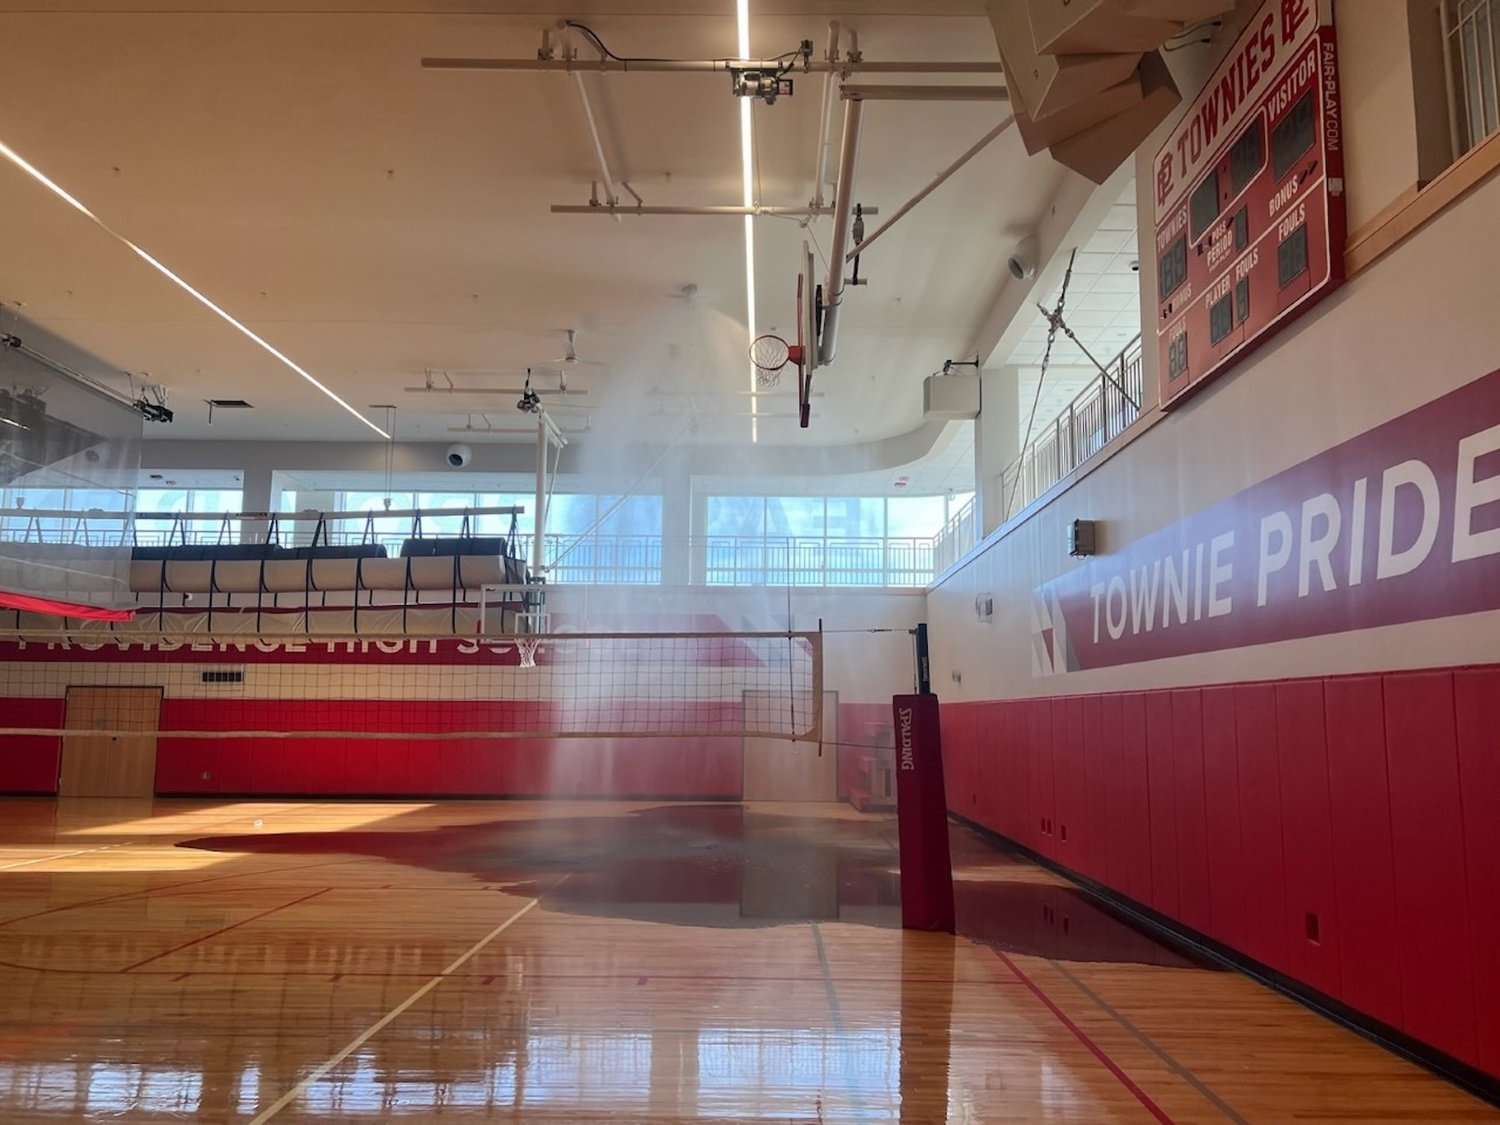 The sprinkler inside the EPHS gym is activated just after an errant strike by a student playing volleyball during a physical education class.